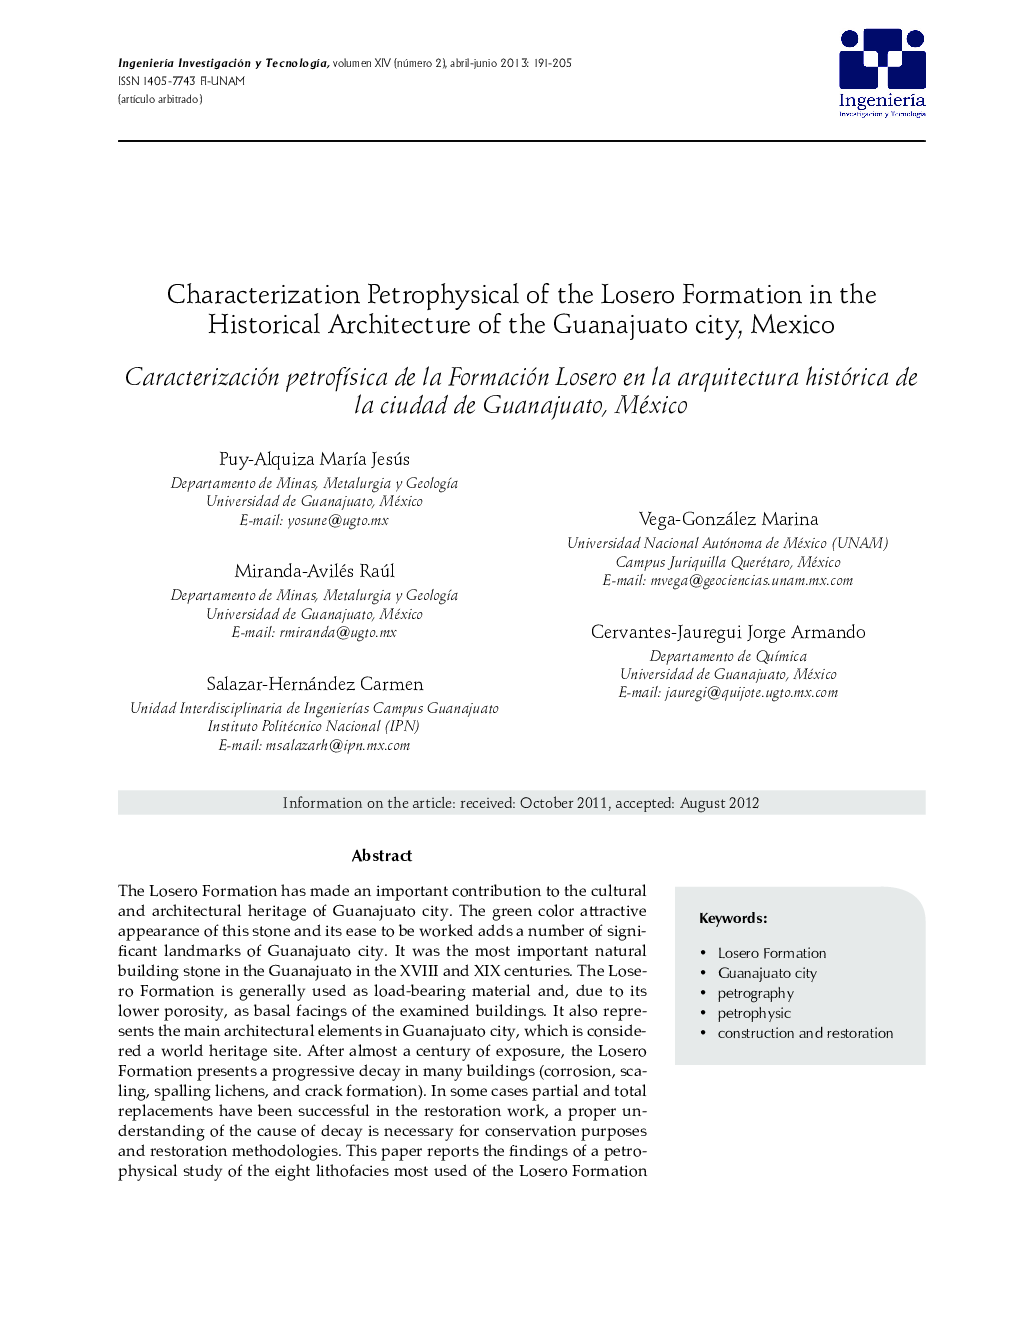 Characterization Petrophysical of the Losero Formation in the Historical Architecture of the Guanajuato city, Mexico *